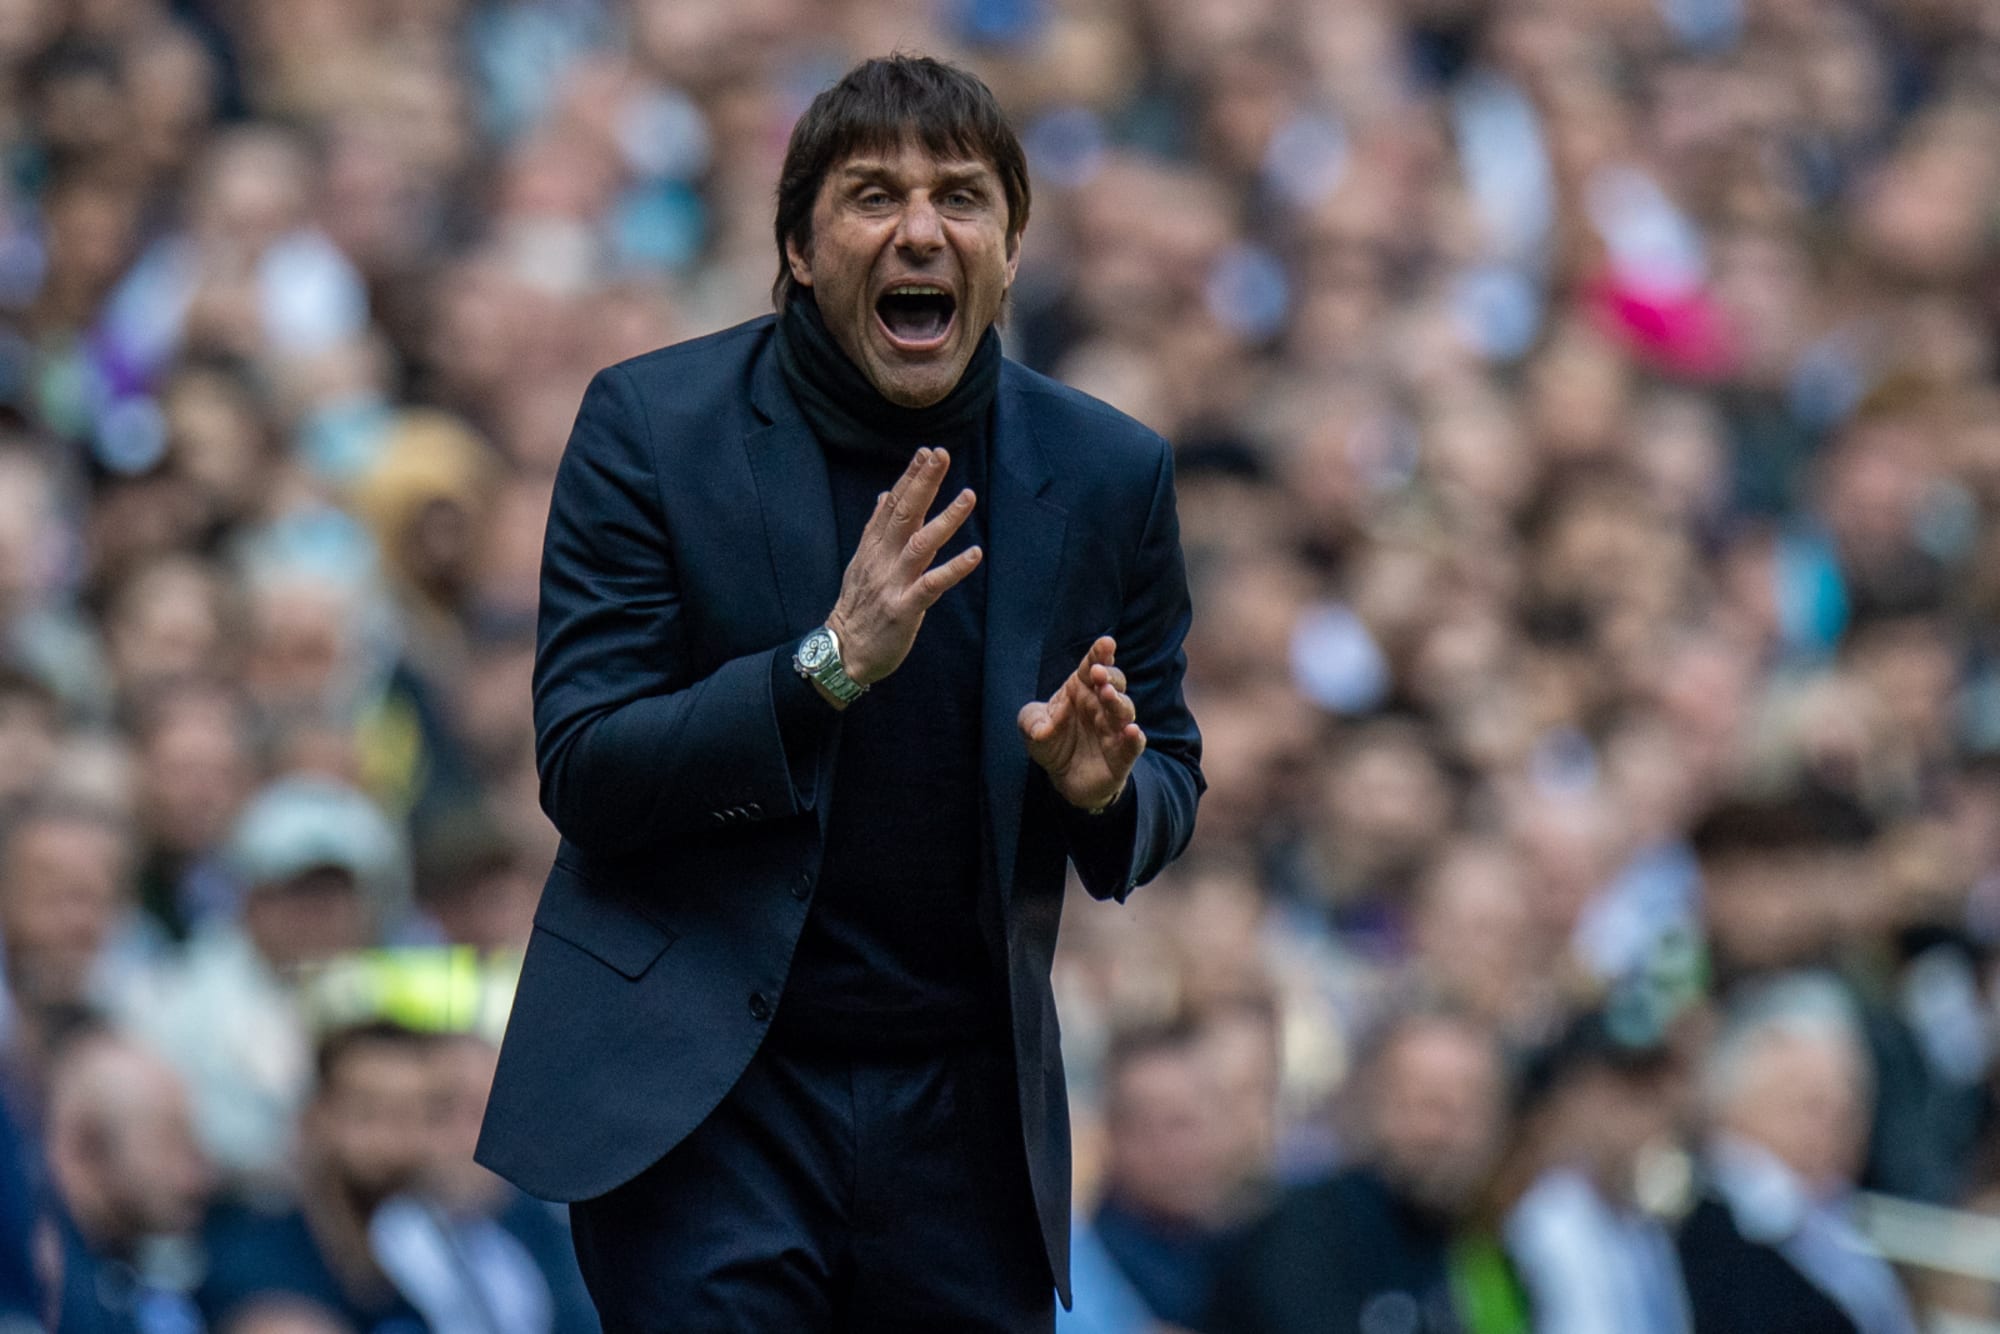 A possible, yet risky solution for Conte’s Tottenham Hotspur conundrum